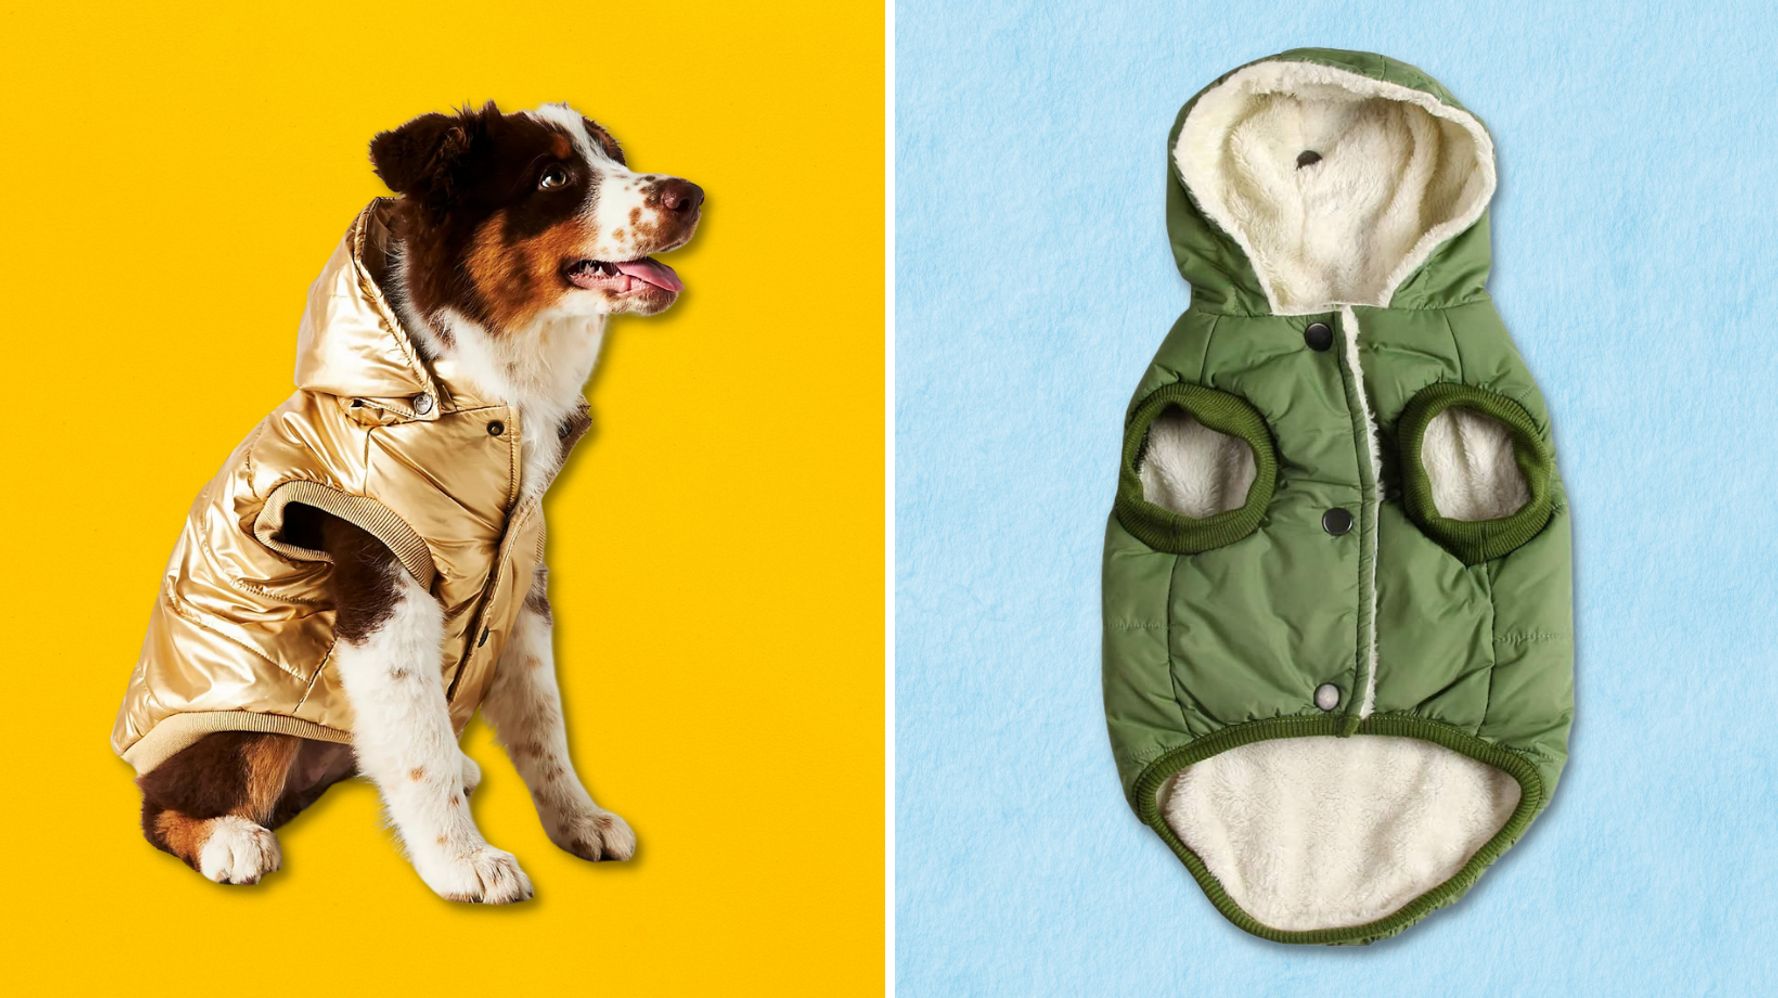 Waterproof Warm Cat Down Jacket for Small Cats Winter Pet Clothes